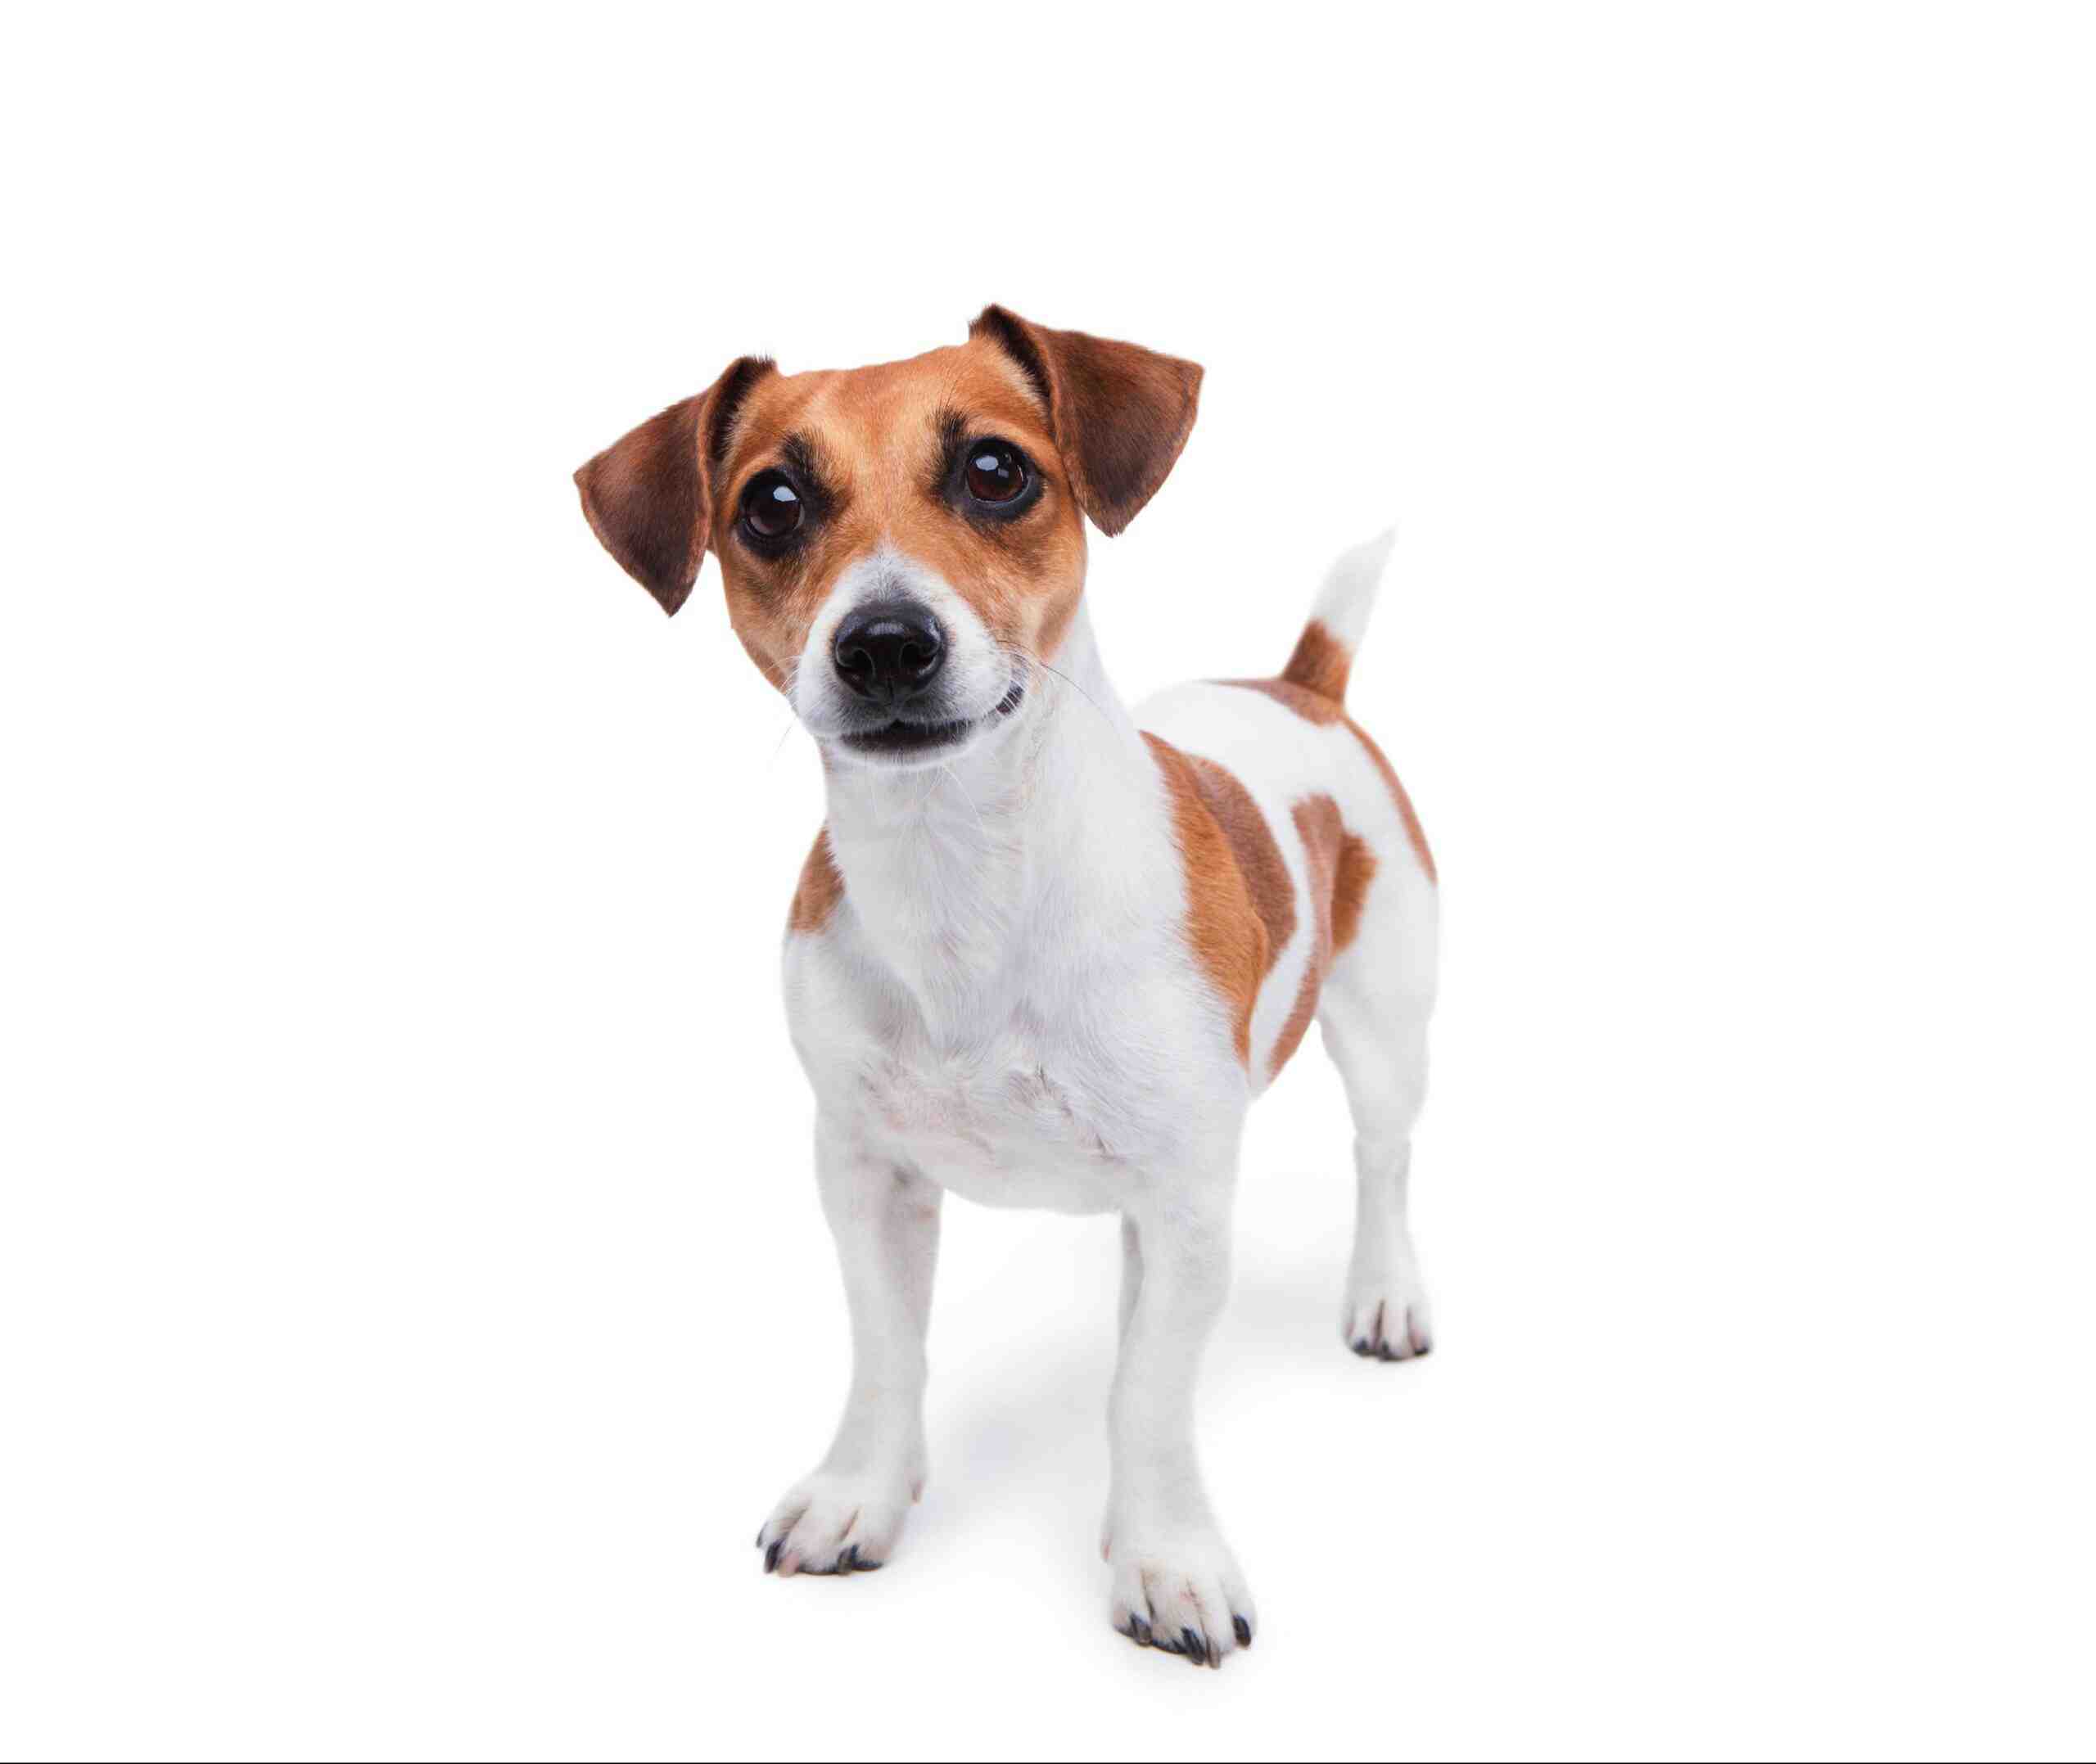 Is a Jack Russell a good first dog?